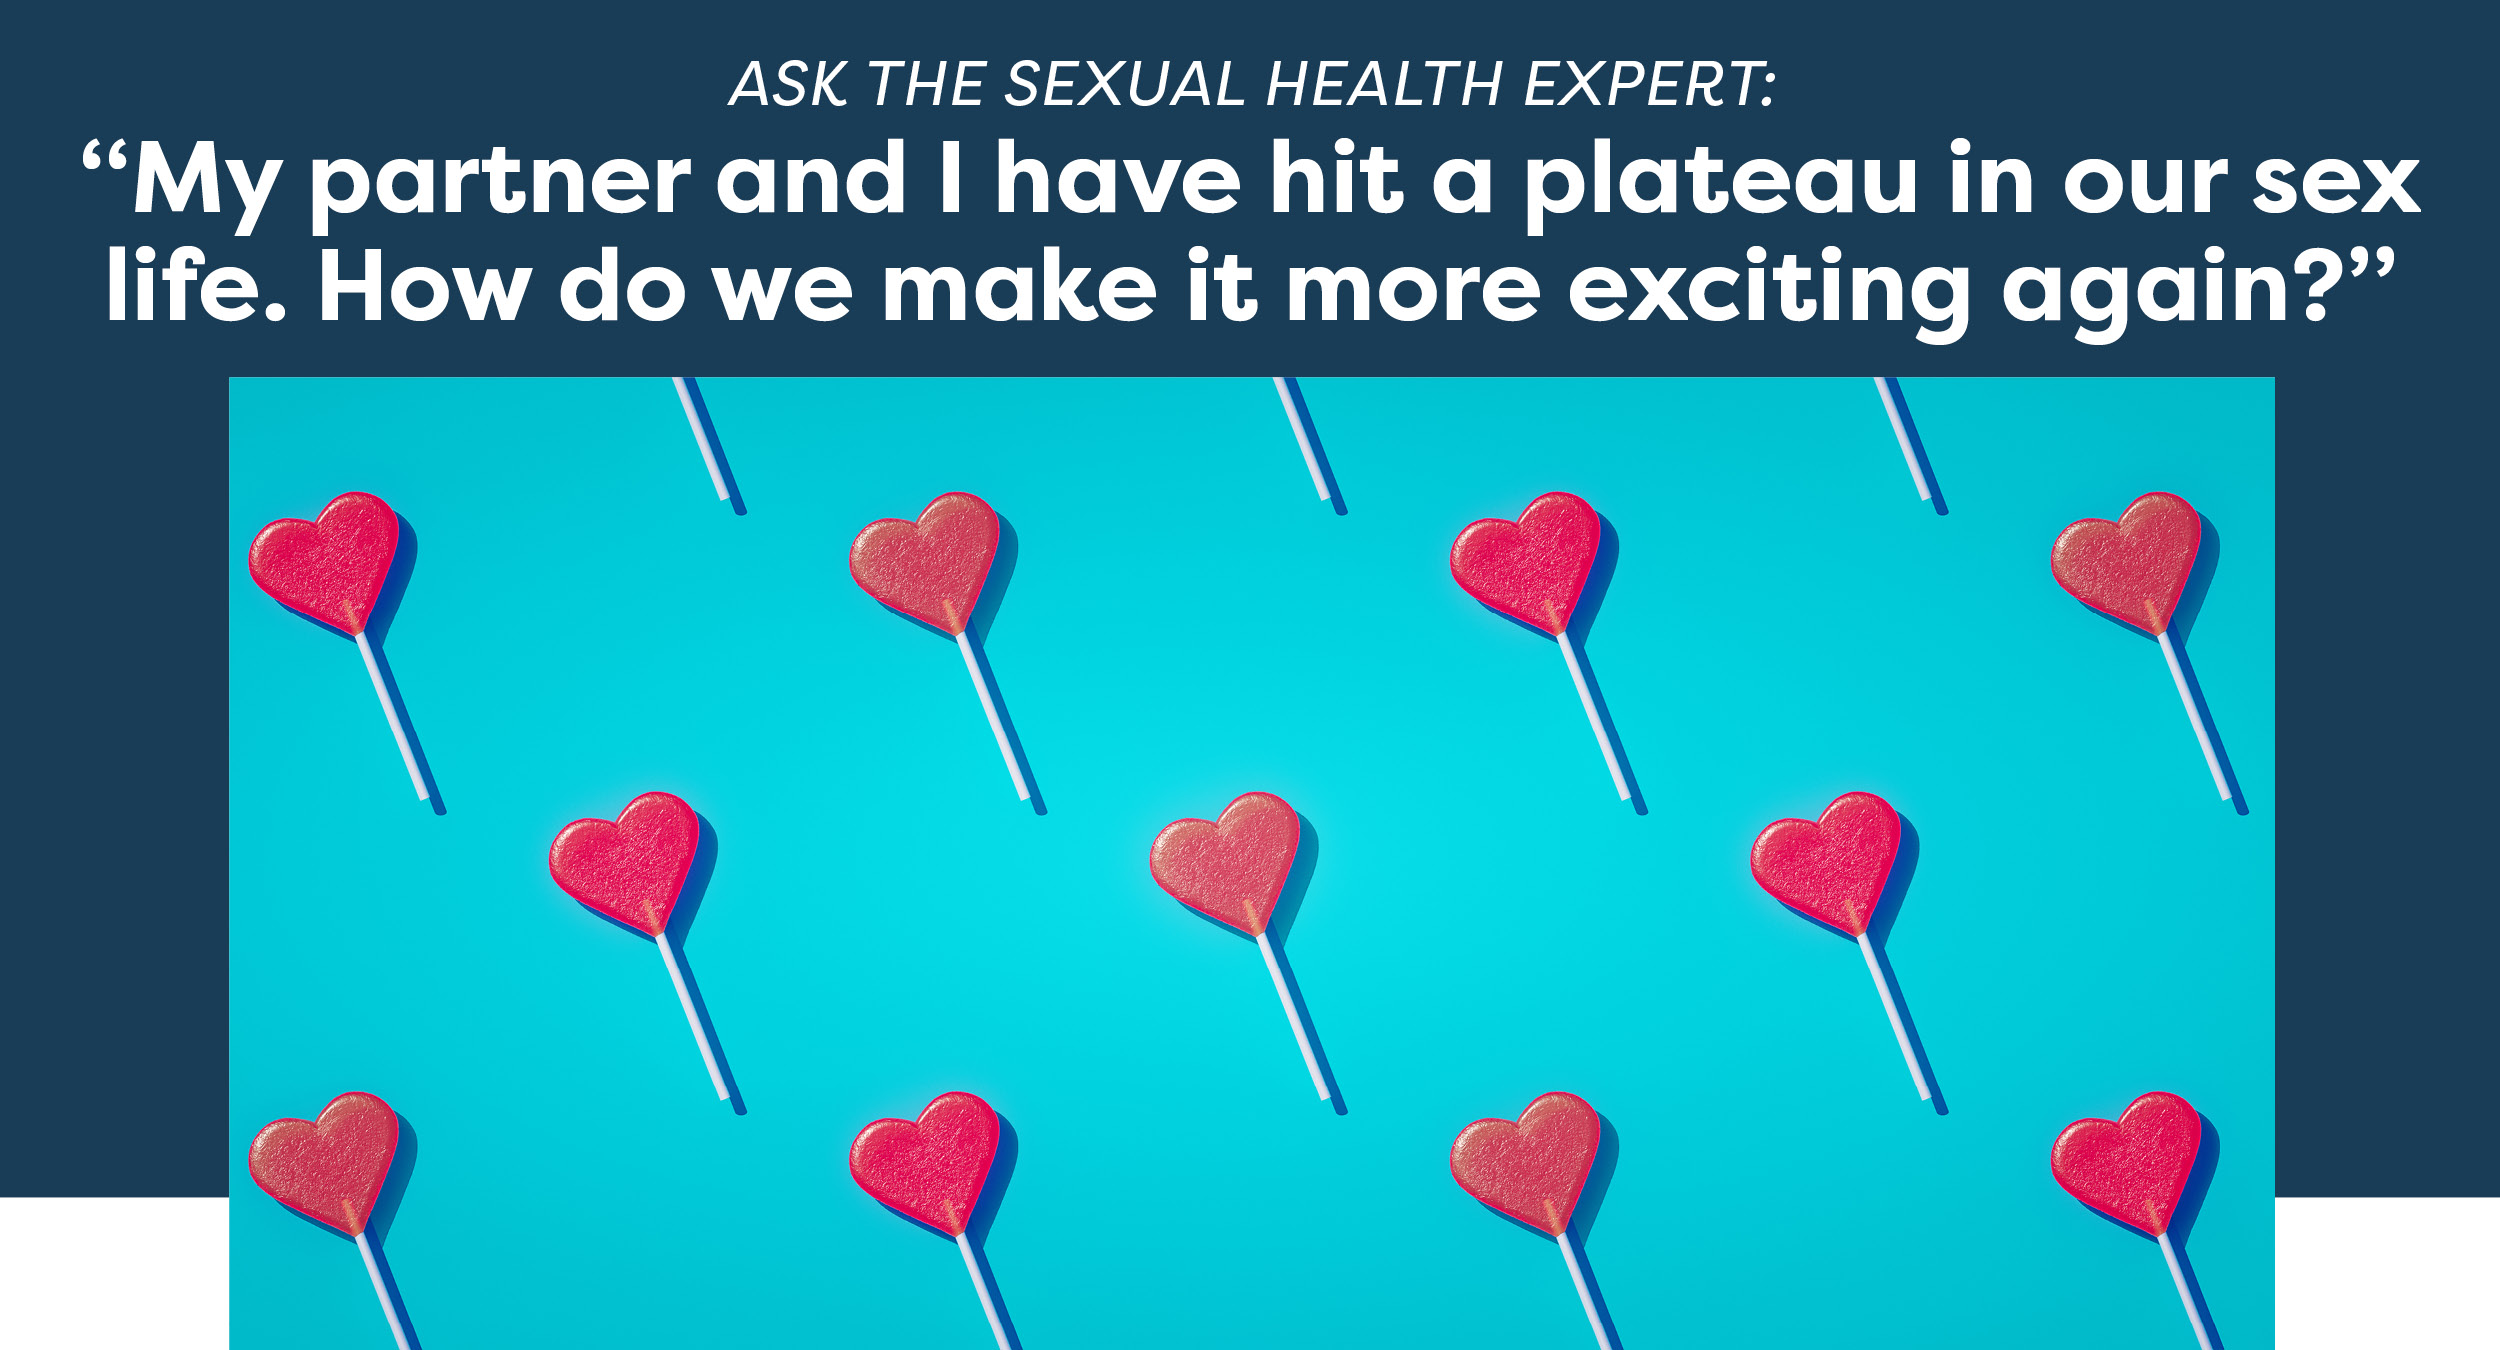 Ask the sexual health expert: “My partner and I have hit a plateau in our sex life. How do we make it more exciting again?”